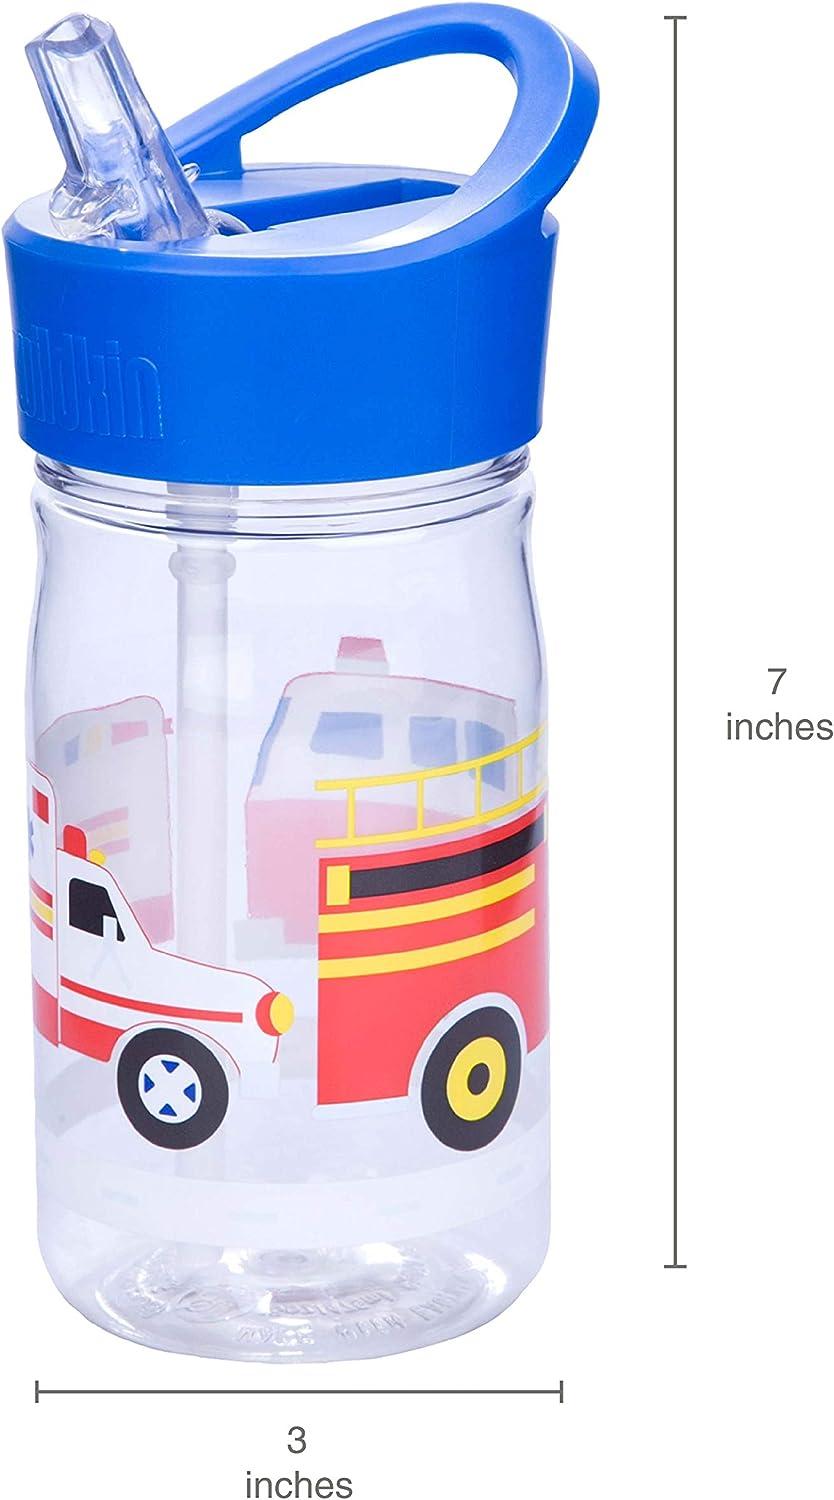 16 oz Kids Water Bottles with Straw Lid & Handle, 6 Pack Personalized  Plastic Water Bottle